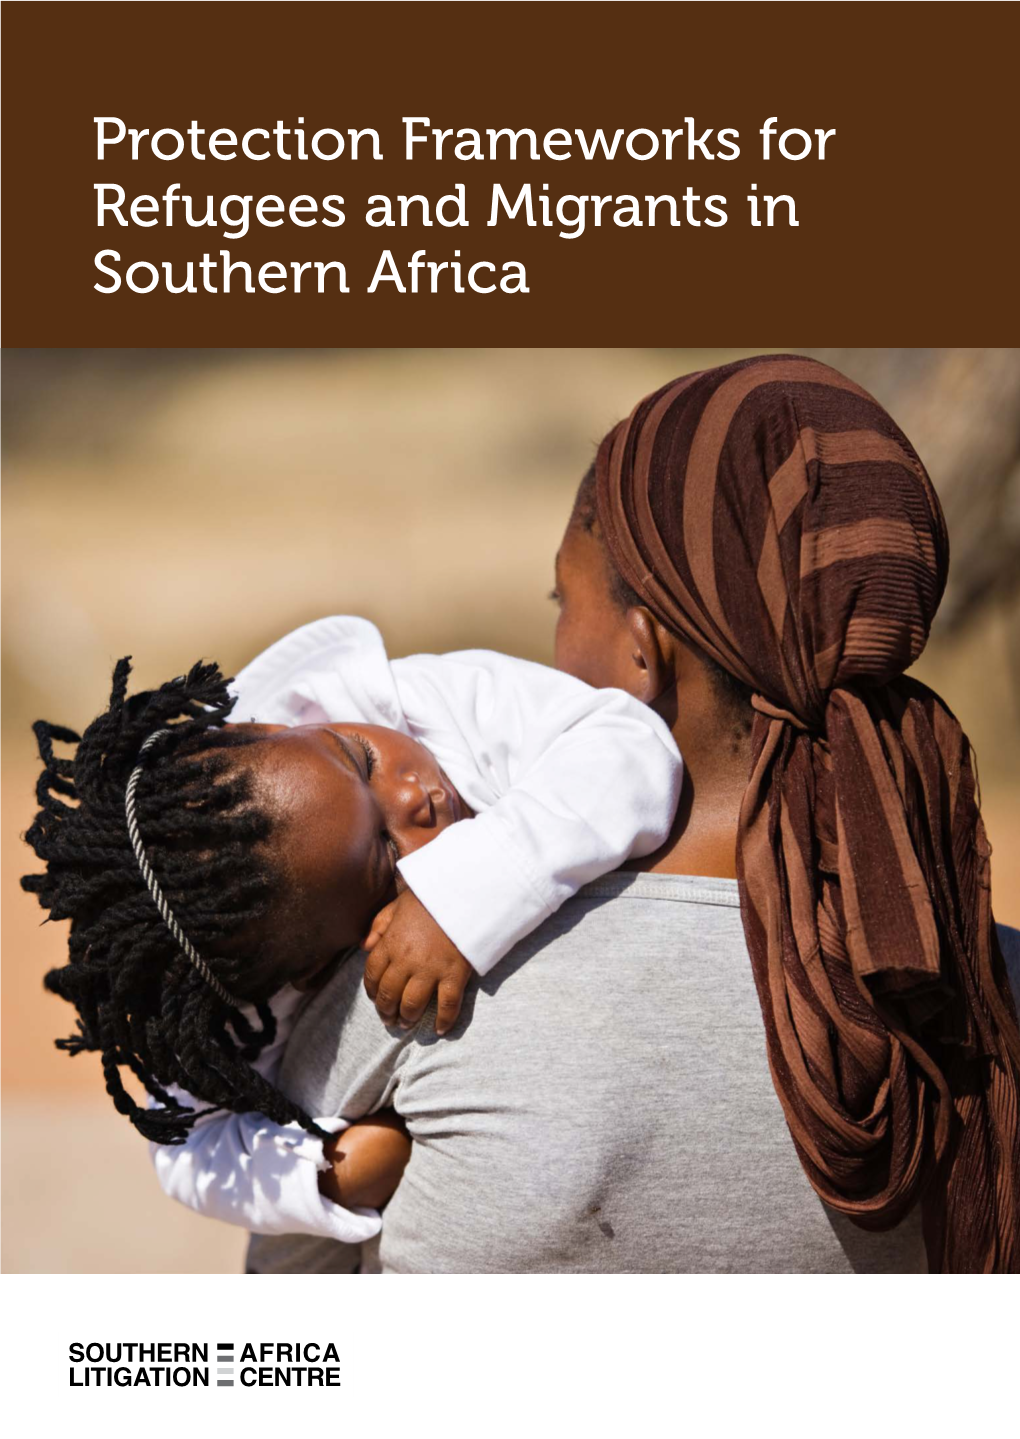 Protection Frameworks for Refugees and Migrants in Southern Africa